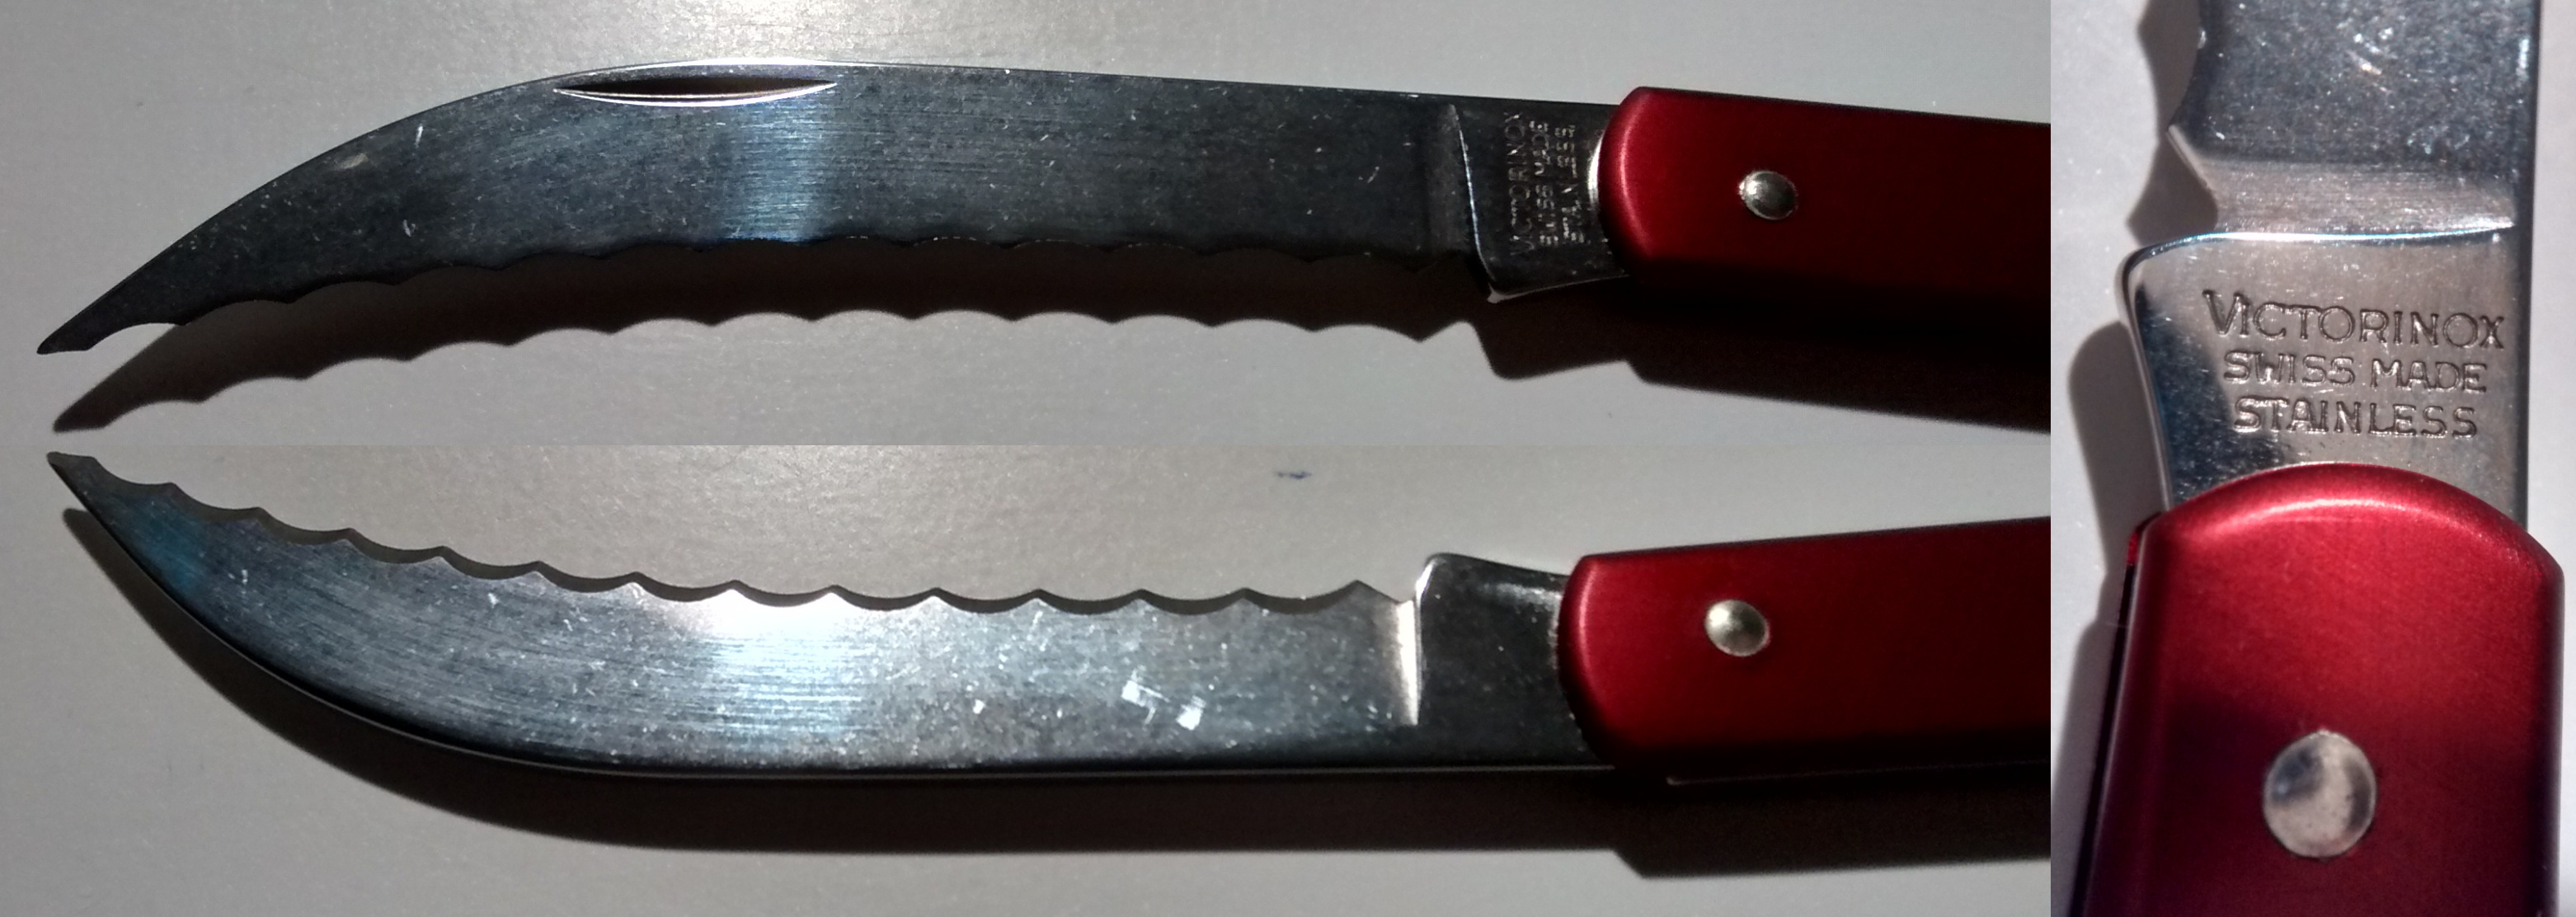 Close Up picture of the Baker's knife serrated blade